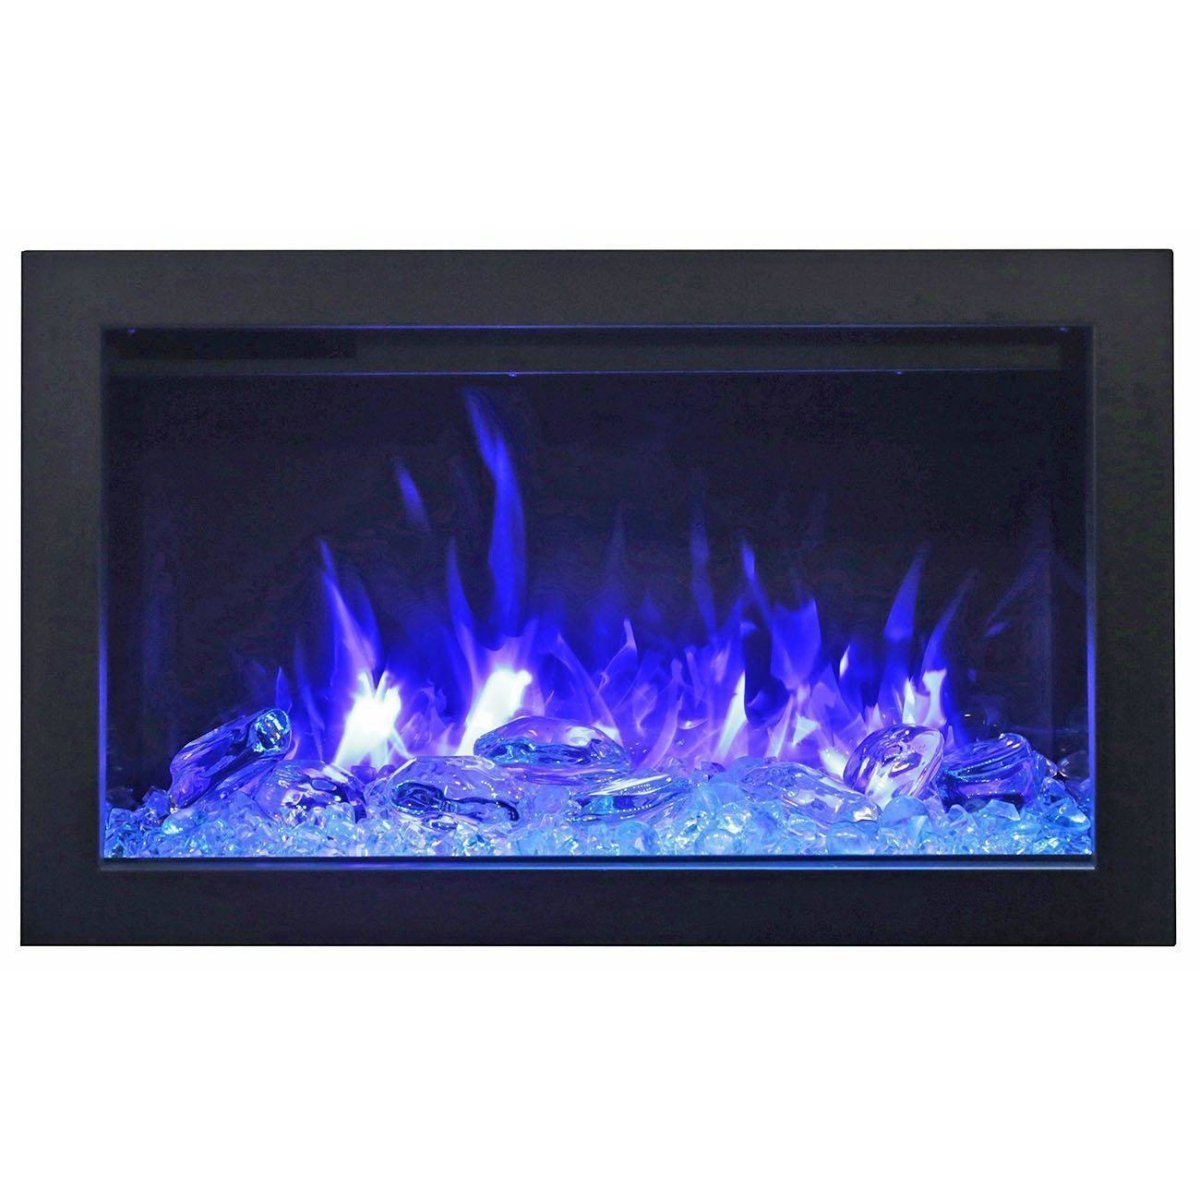 Amantii TRD-30 - Traditional Series Electric Fireplace - 76cm - Outdoorium